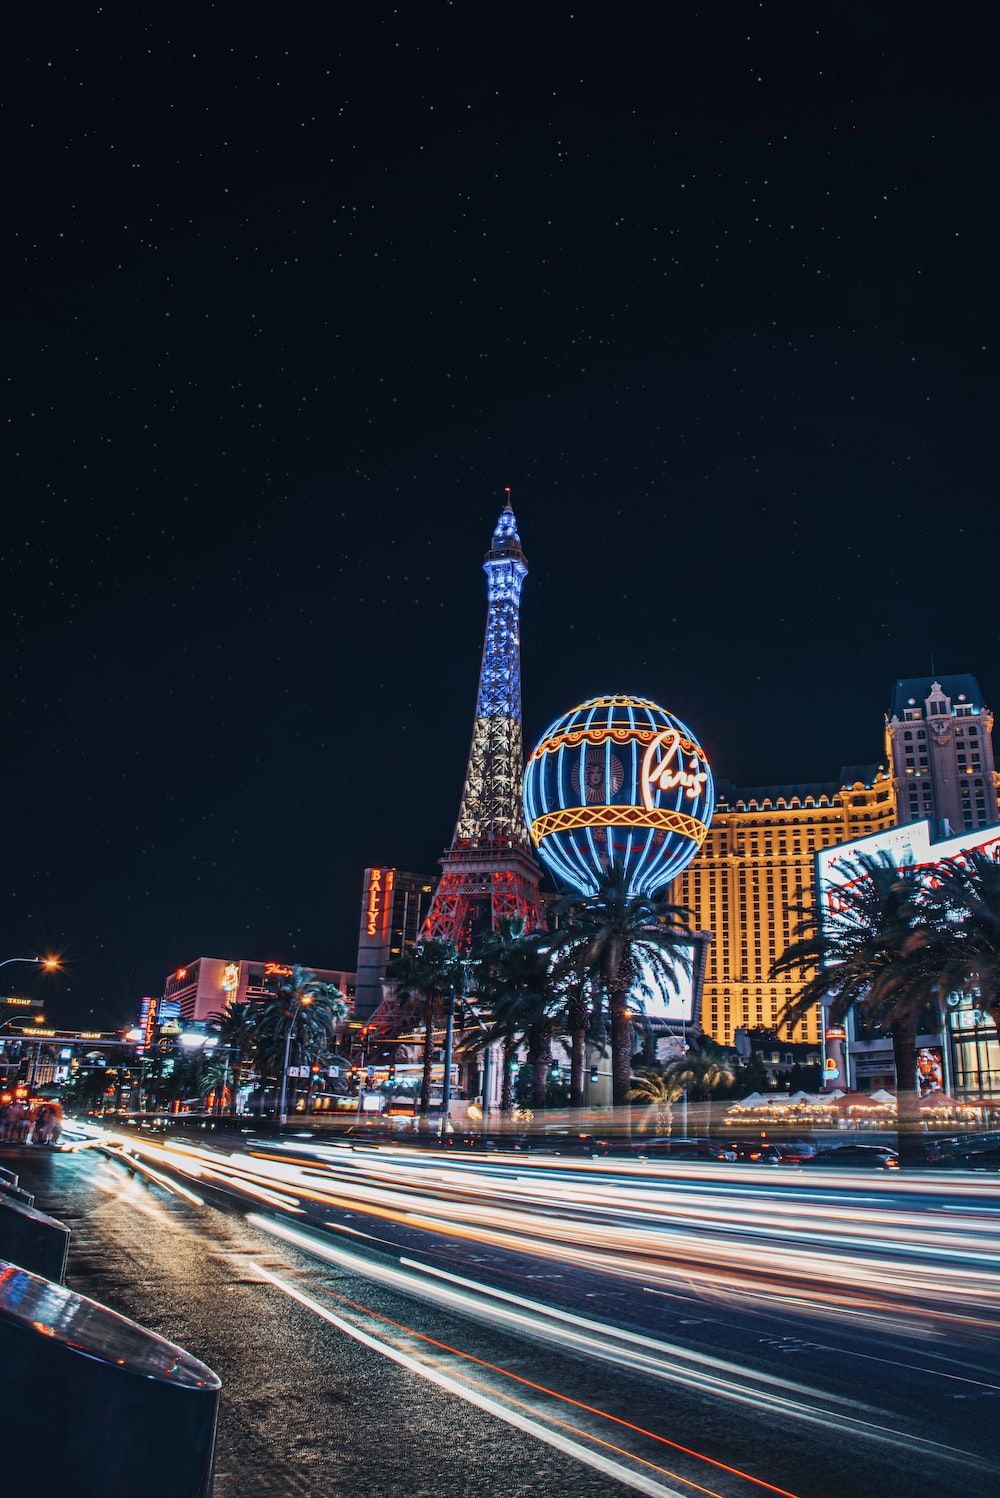 The night view of the city with the Eiffel Tower - Las Vegas